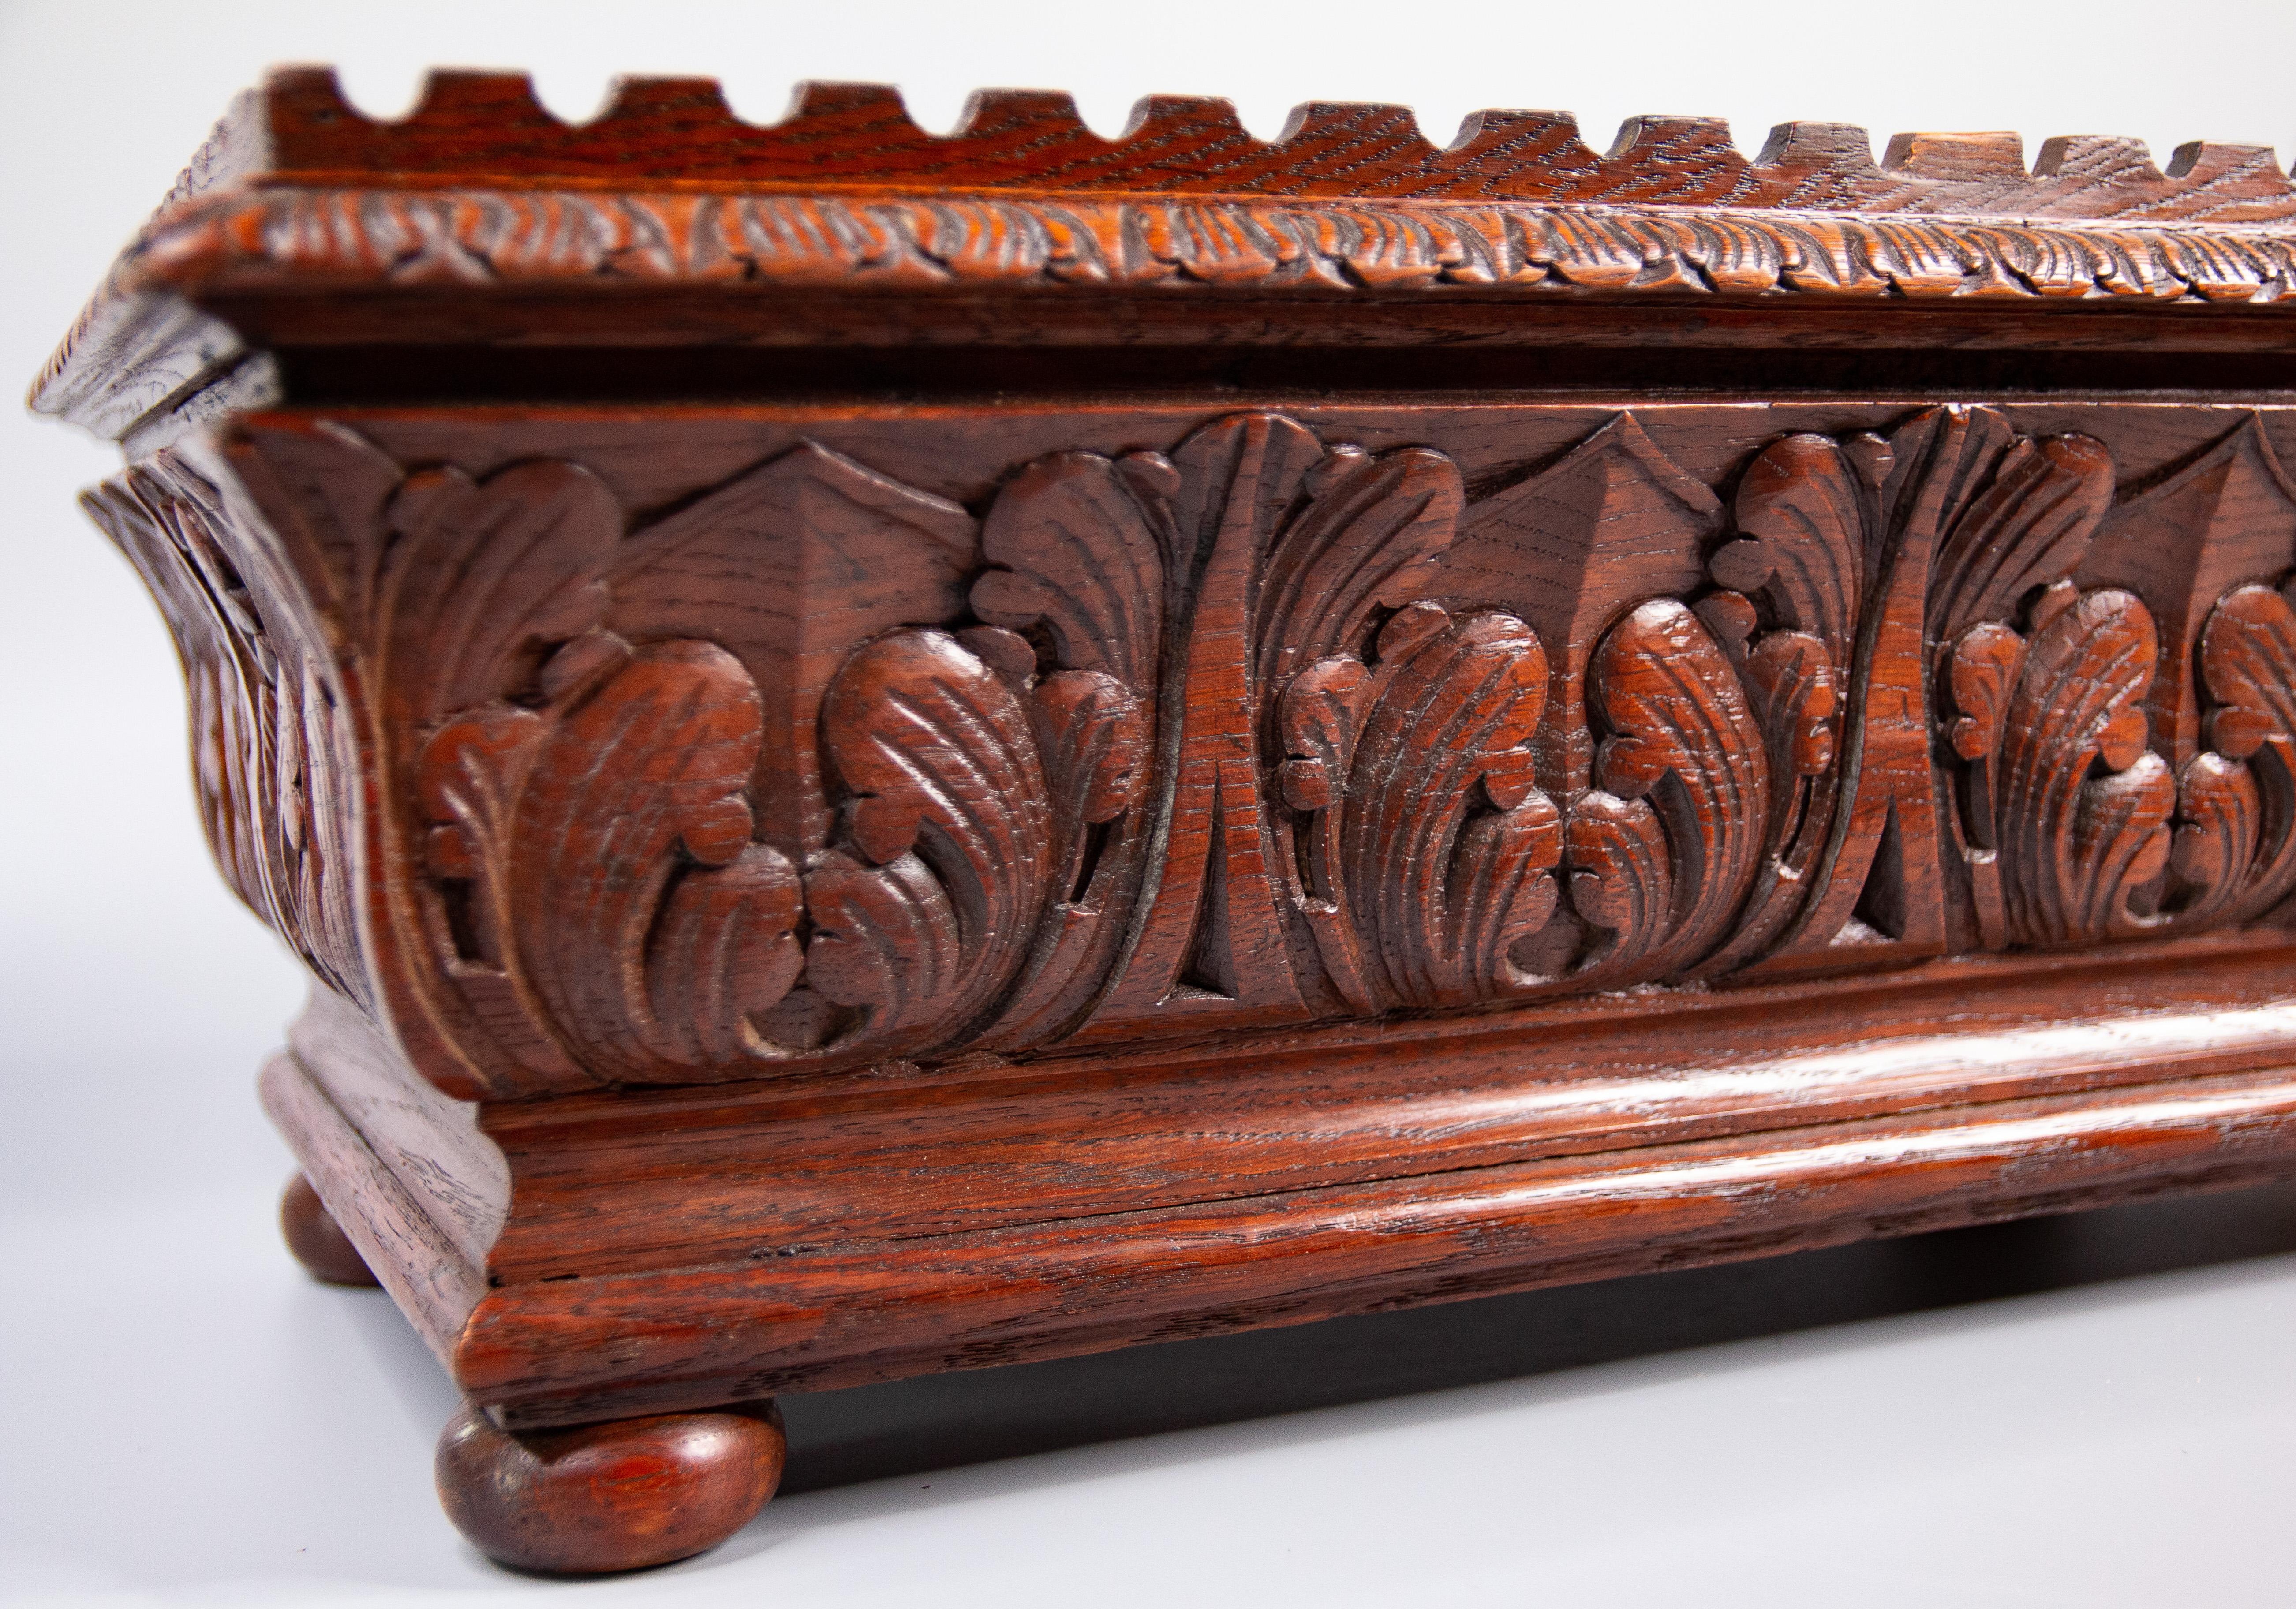 Hand-Carved Antique 19th-Century French Mahogany Carved Jardiniere Planter For Sale